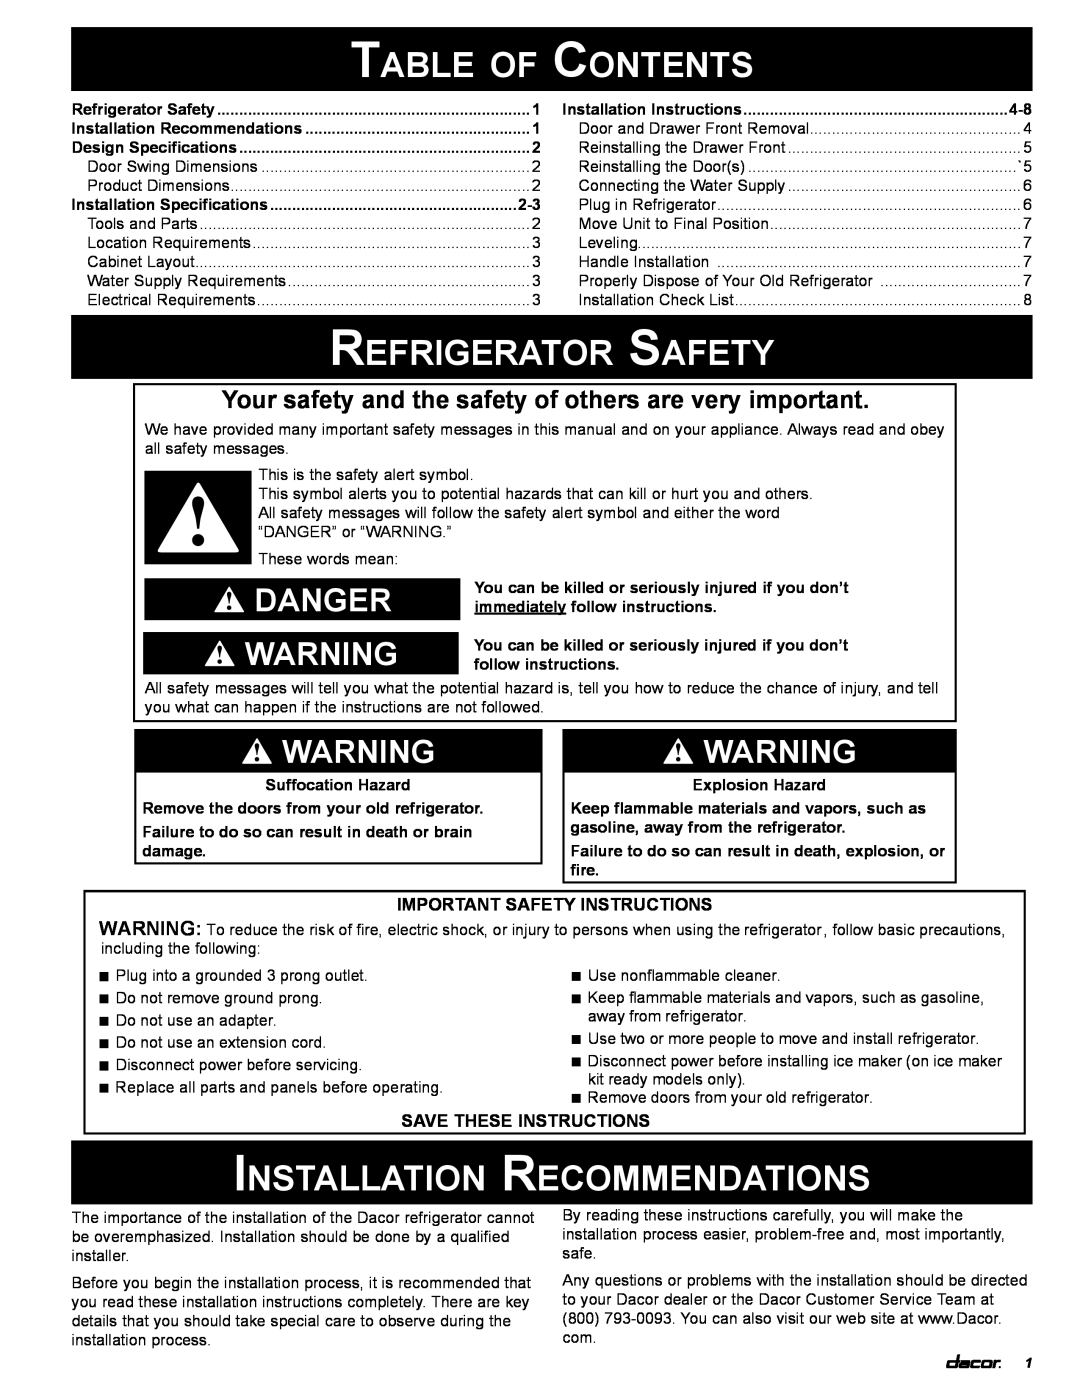 Dacor PF36BNDF Table of Contents, Refrigerator Safety, Installation Recommendations, Danger, IMPORTANT SAFETY instructions 